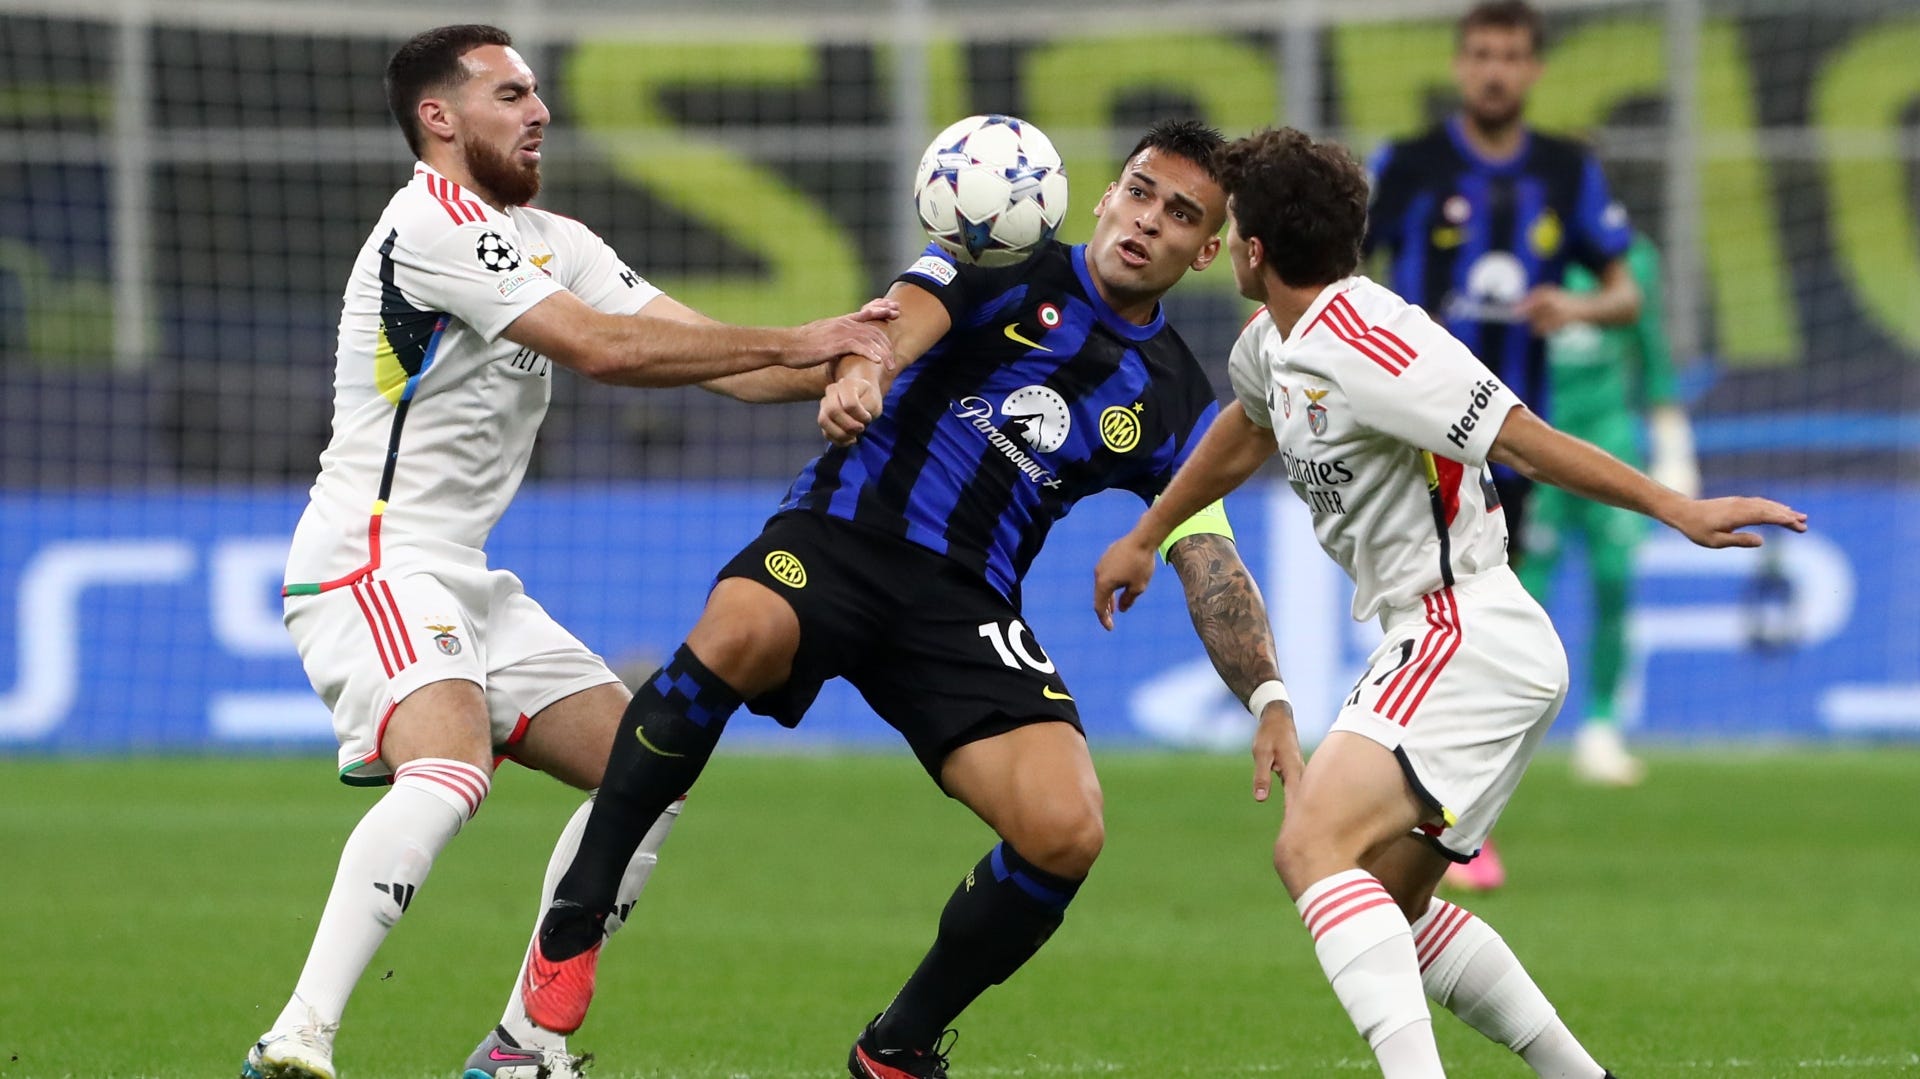 Benfica vs Inter Where to watch the match online, live stream, TV channels, and kick-off time Goal UK